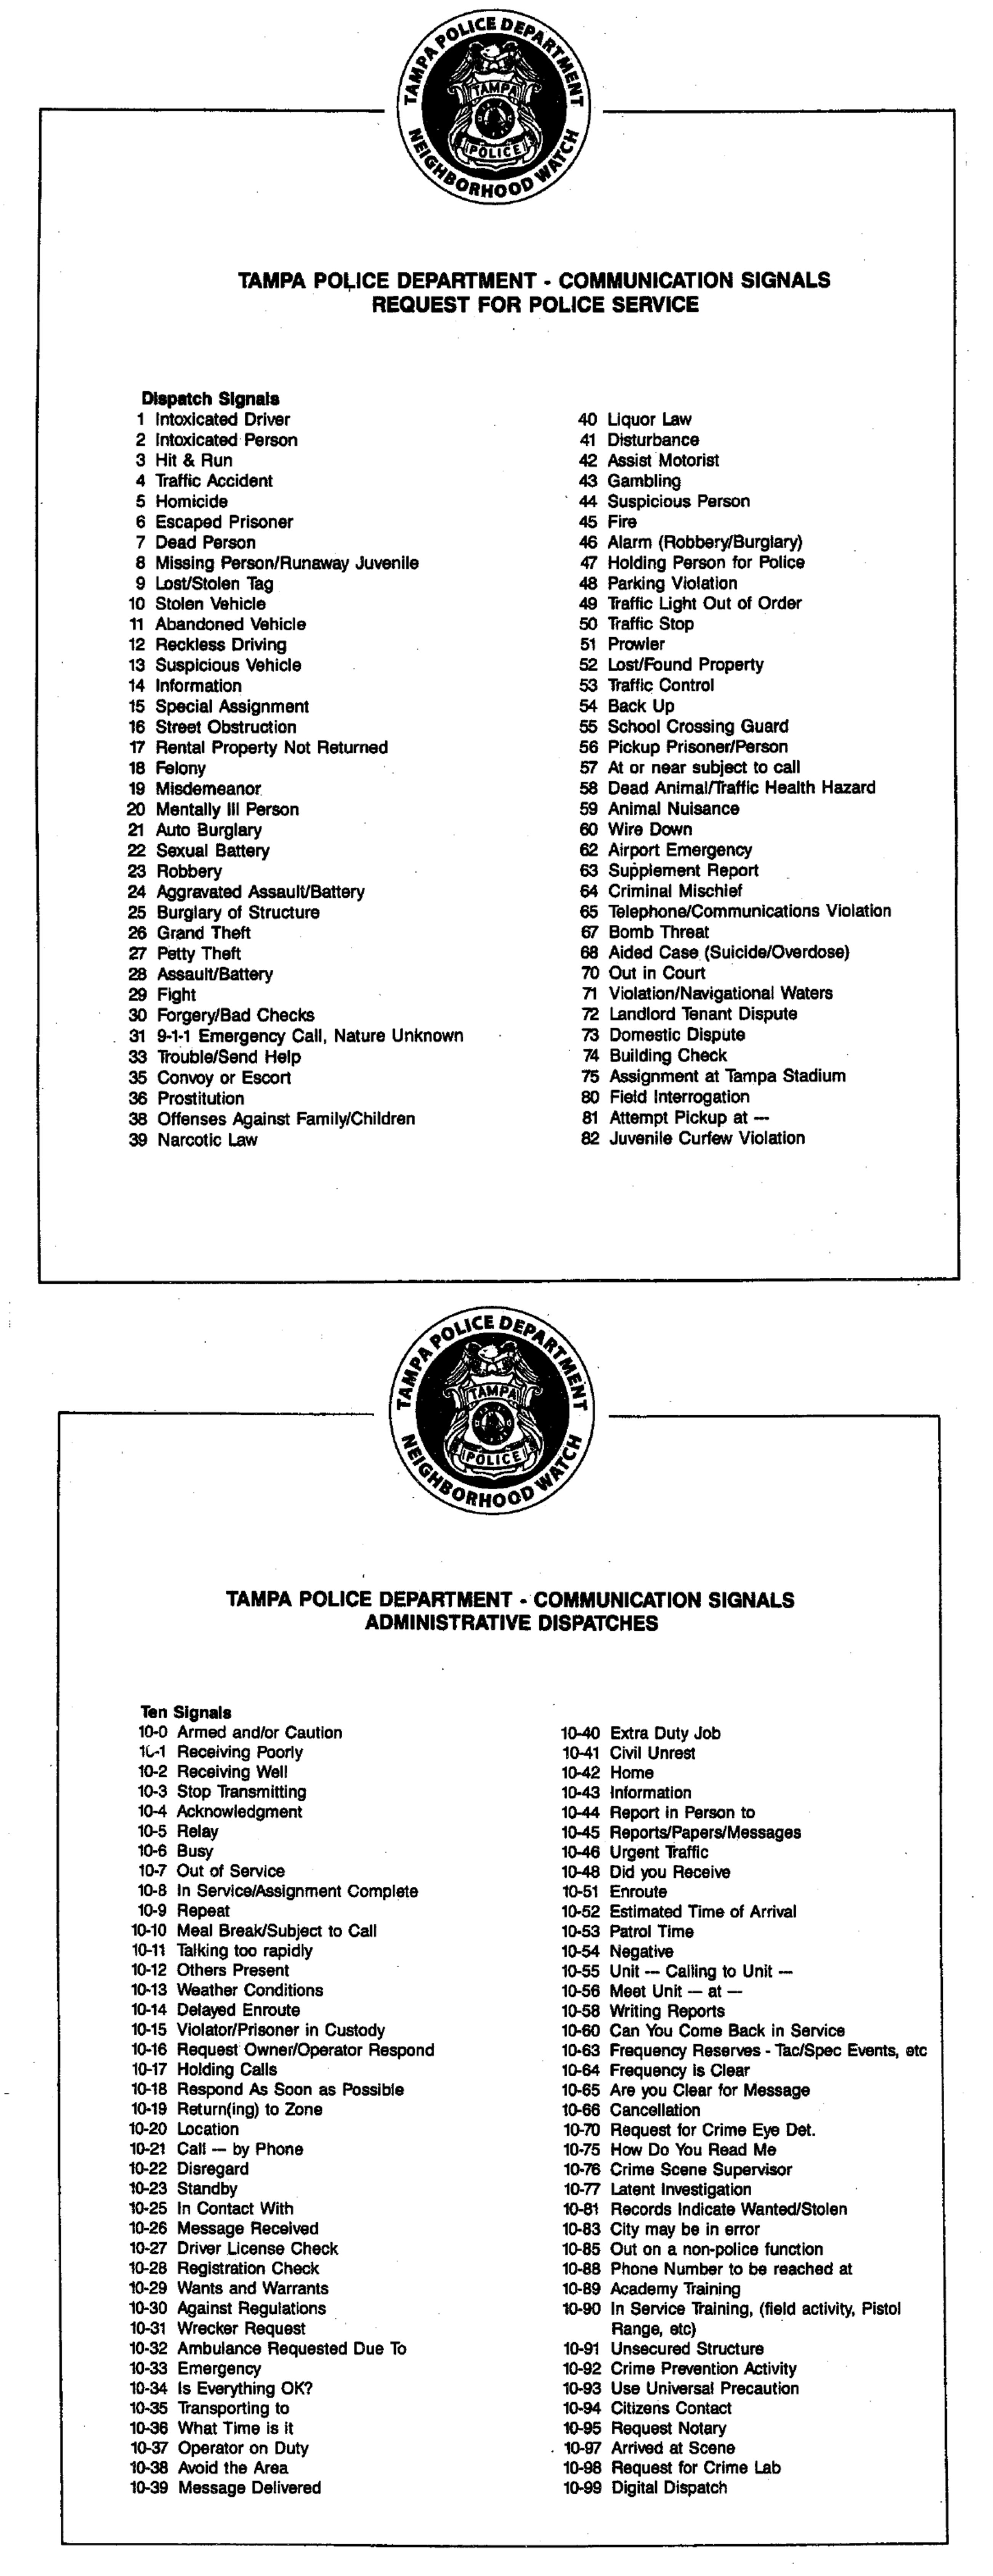 Tampa police codes